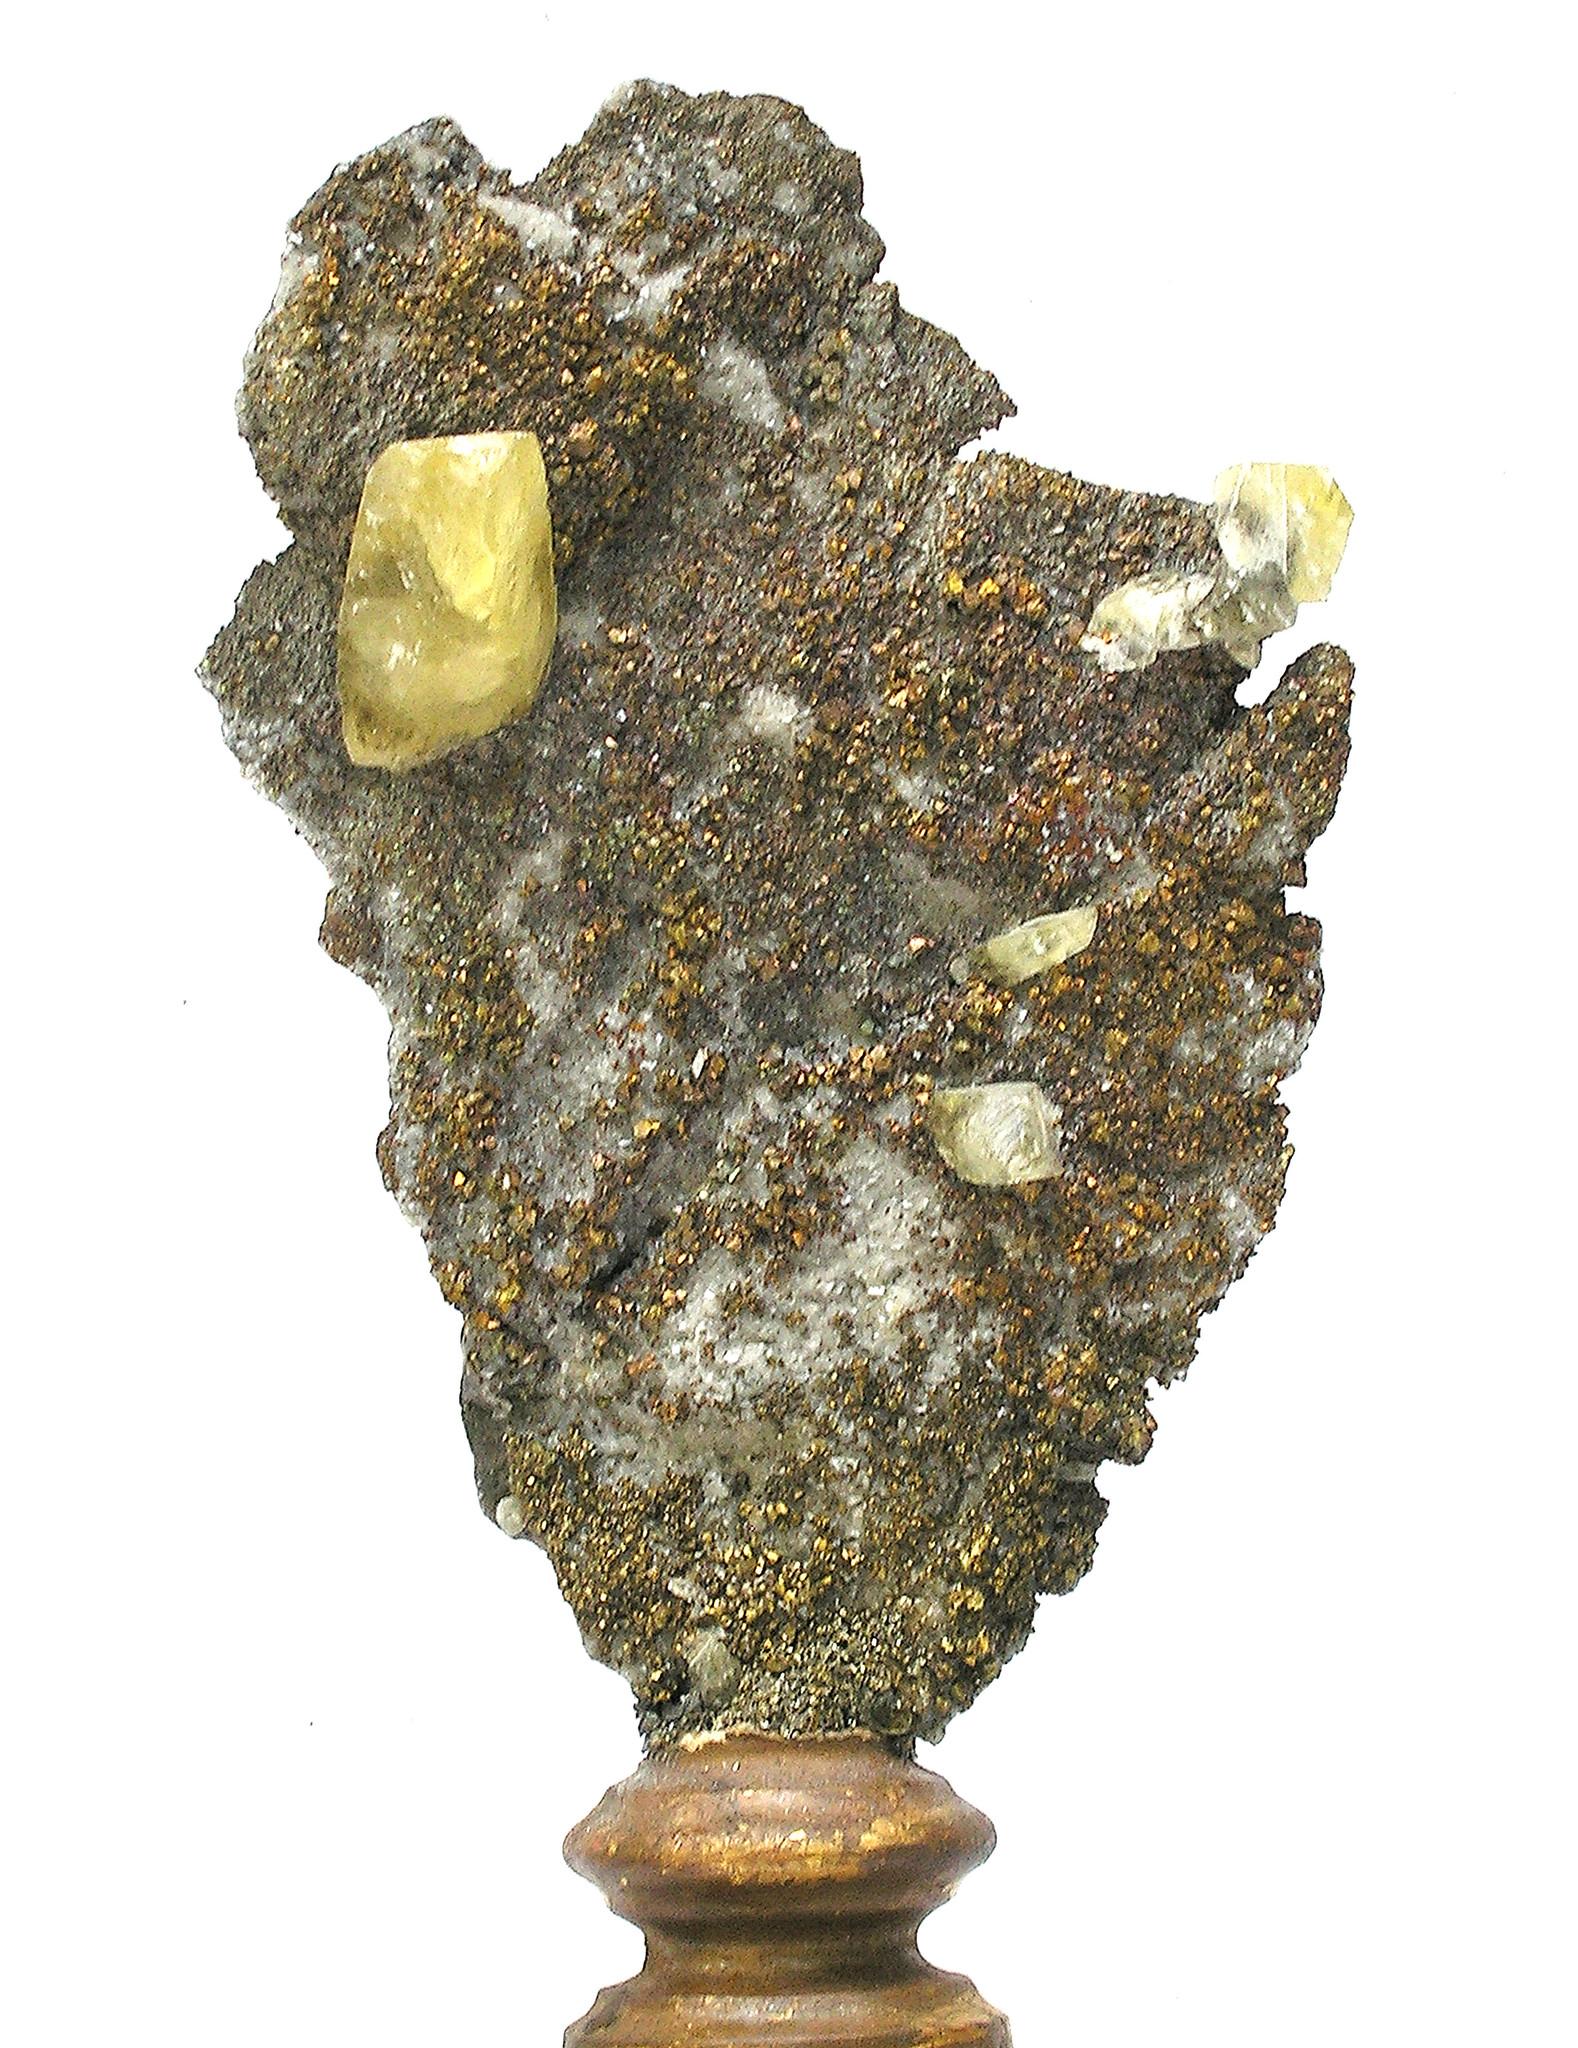 Rococo 18th Century Italian Fragment with Chalcopyrite and Calcite Crystals in Matrix For Sale